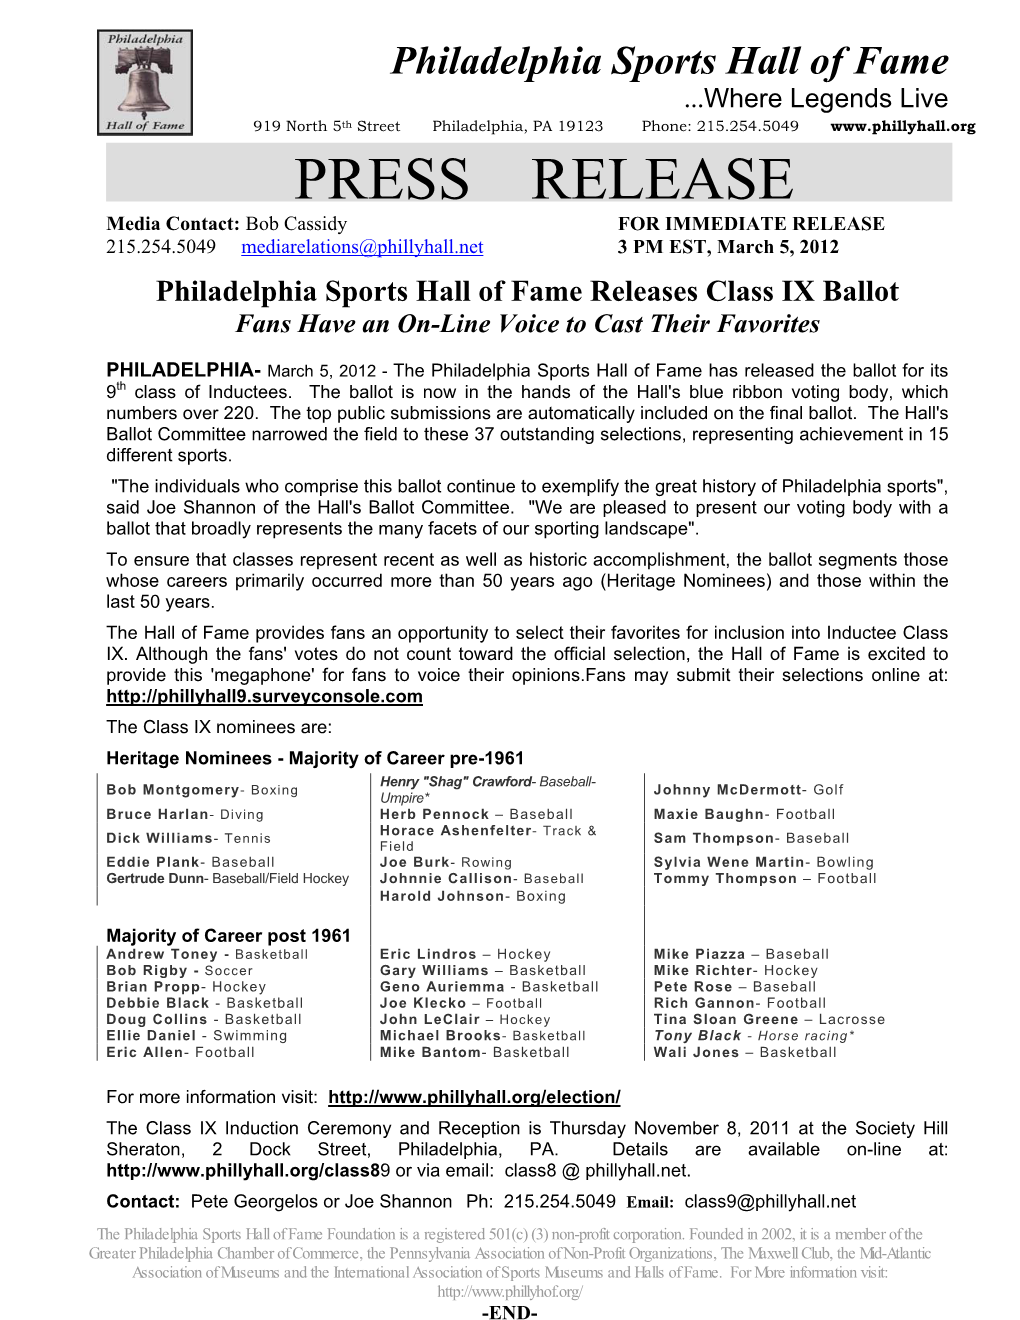 PRESS RELEASE Media Contact: Bob Cassidy for IMMEDIATE RELEASE 215.254.5049 Mediarelations@Phillyhall.Net 3 PM EST, March 5, 2012